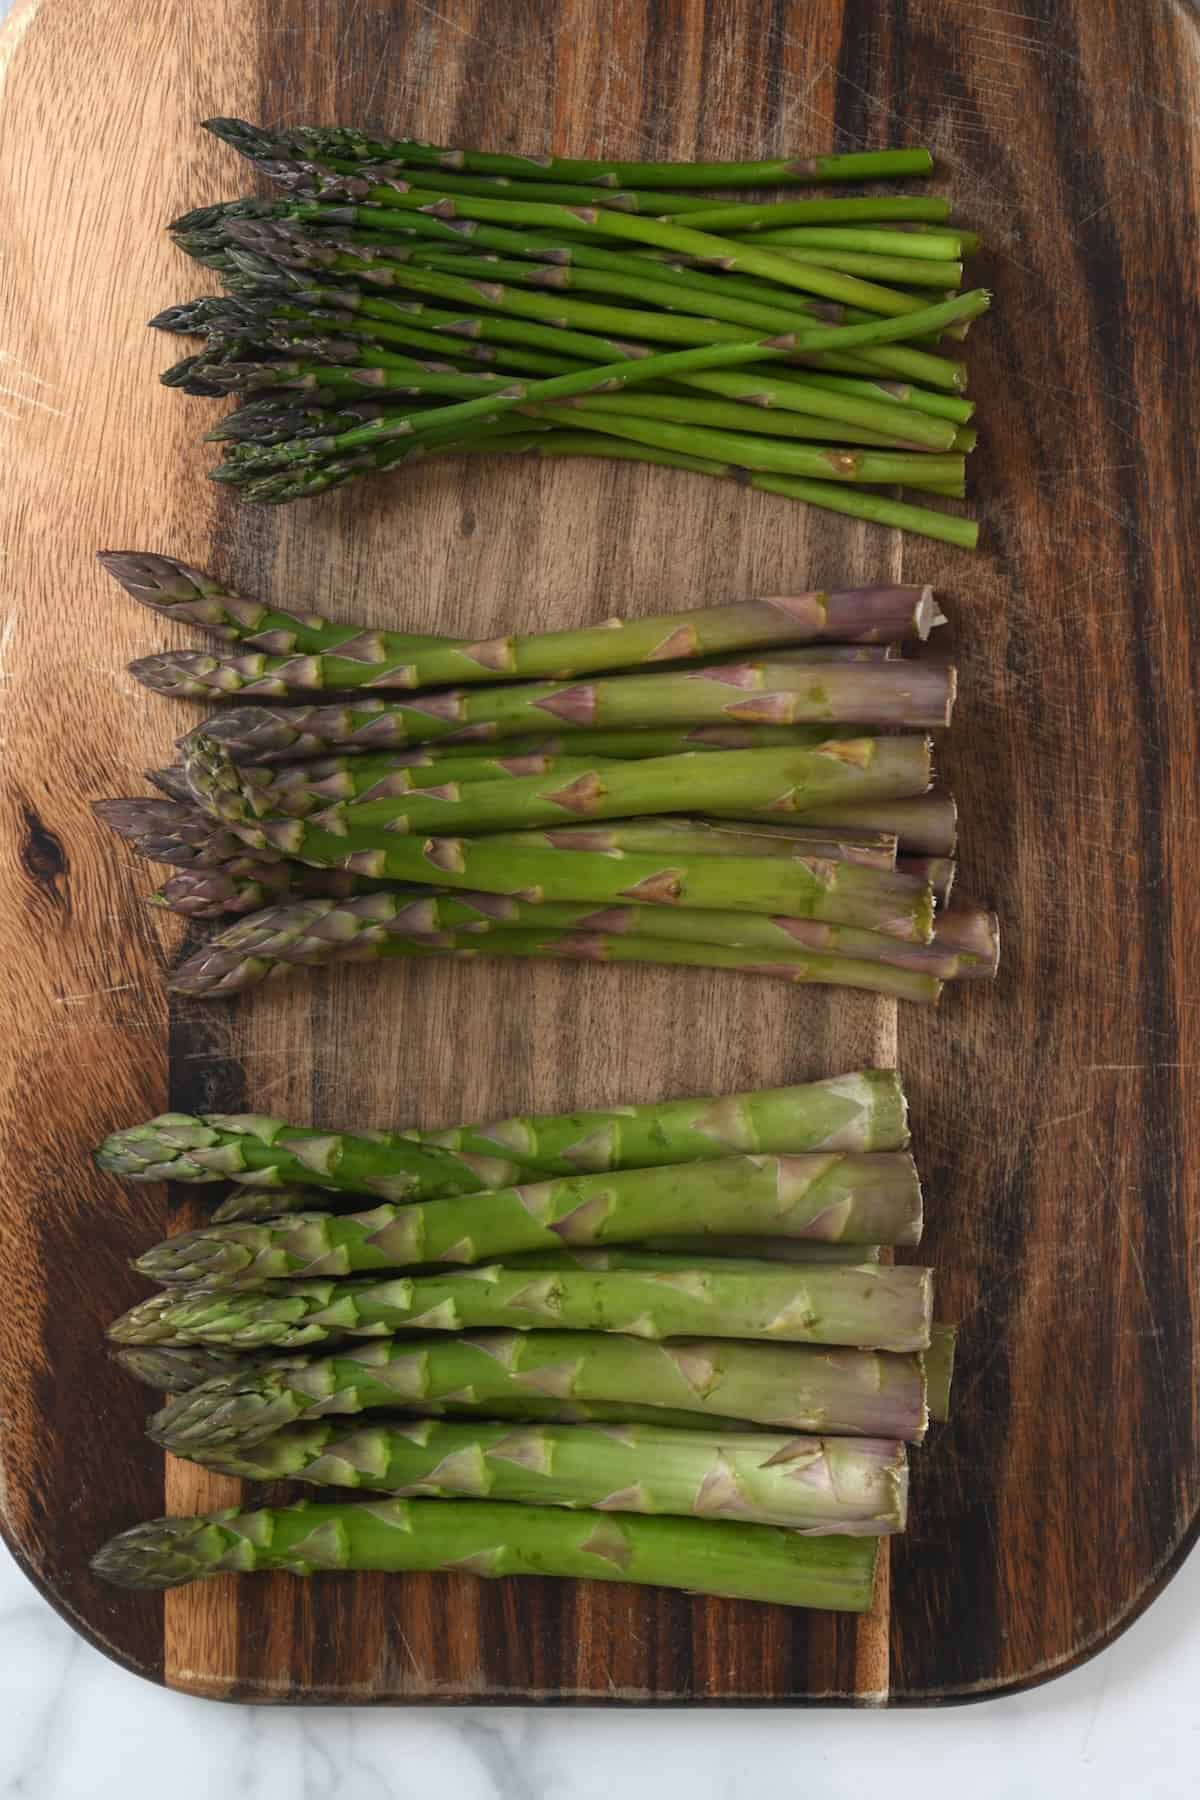 Three bunches of asparagus with different thickness